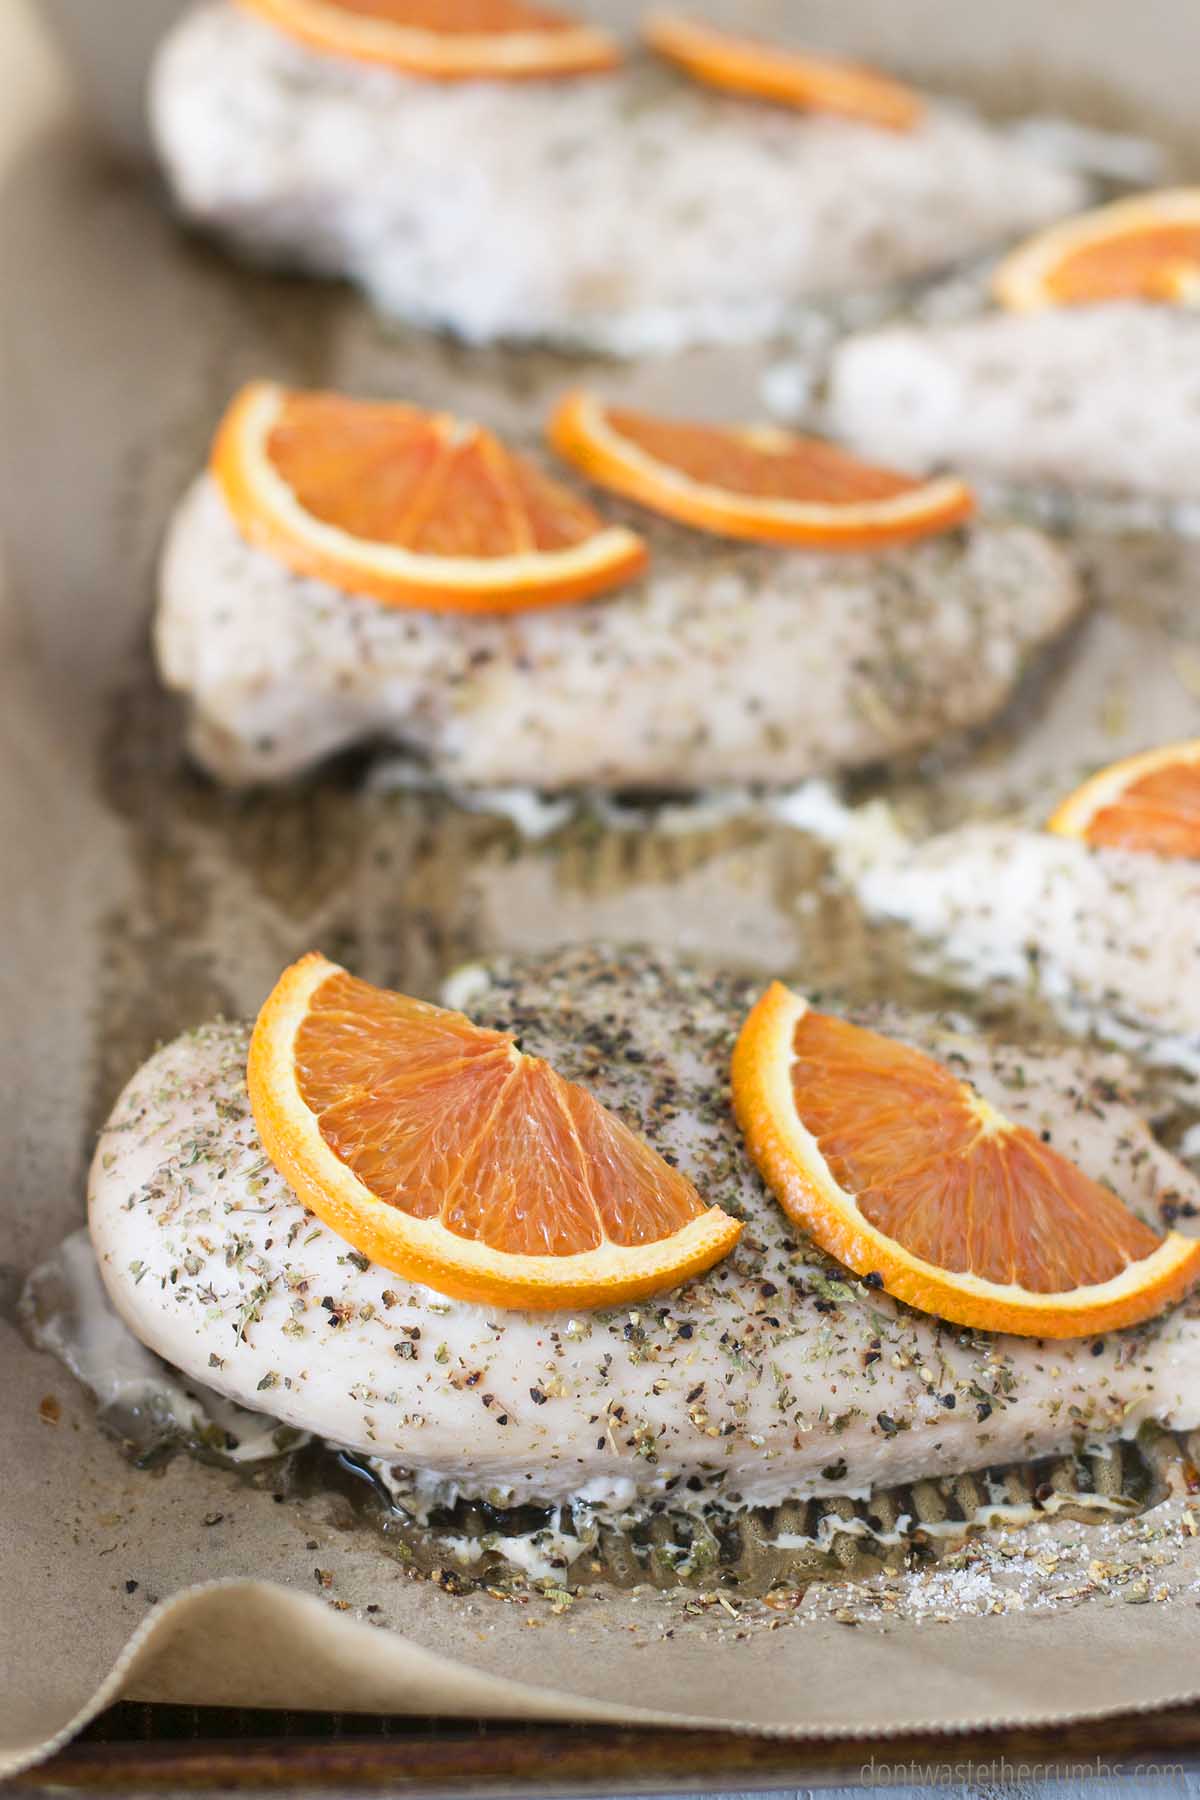 Cooked chicken breast seasoned with herbs and orange slices on baking sheet.